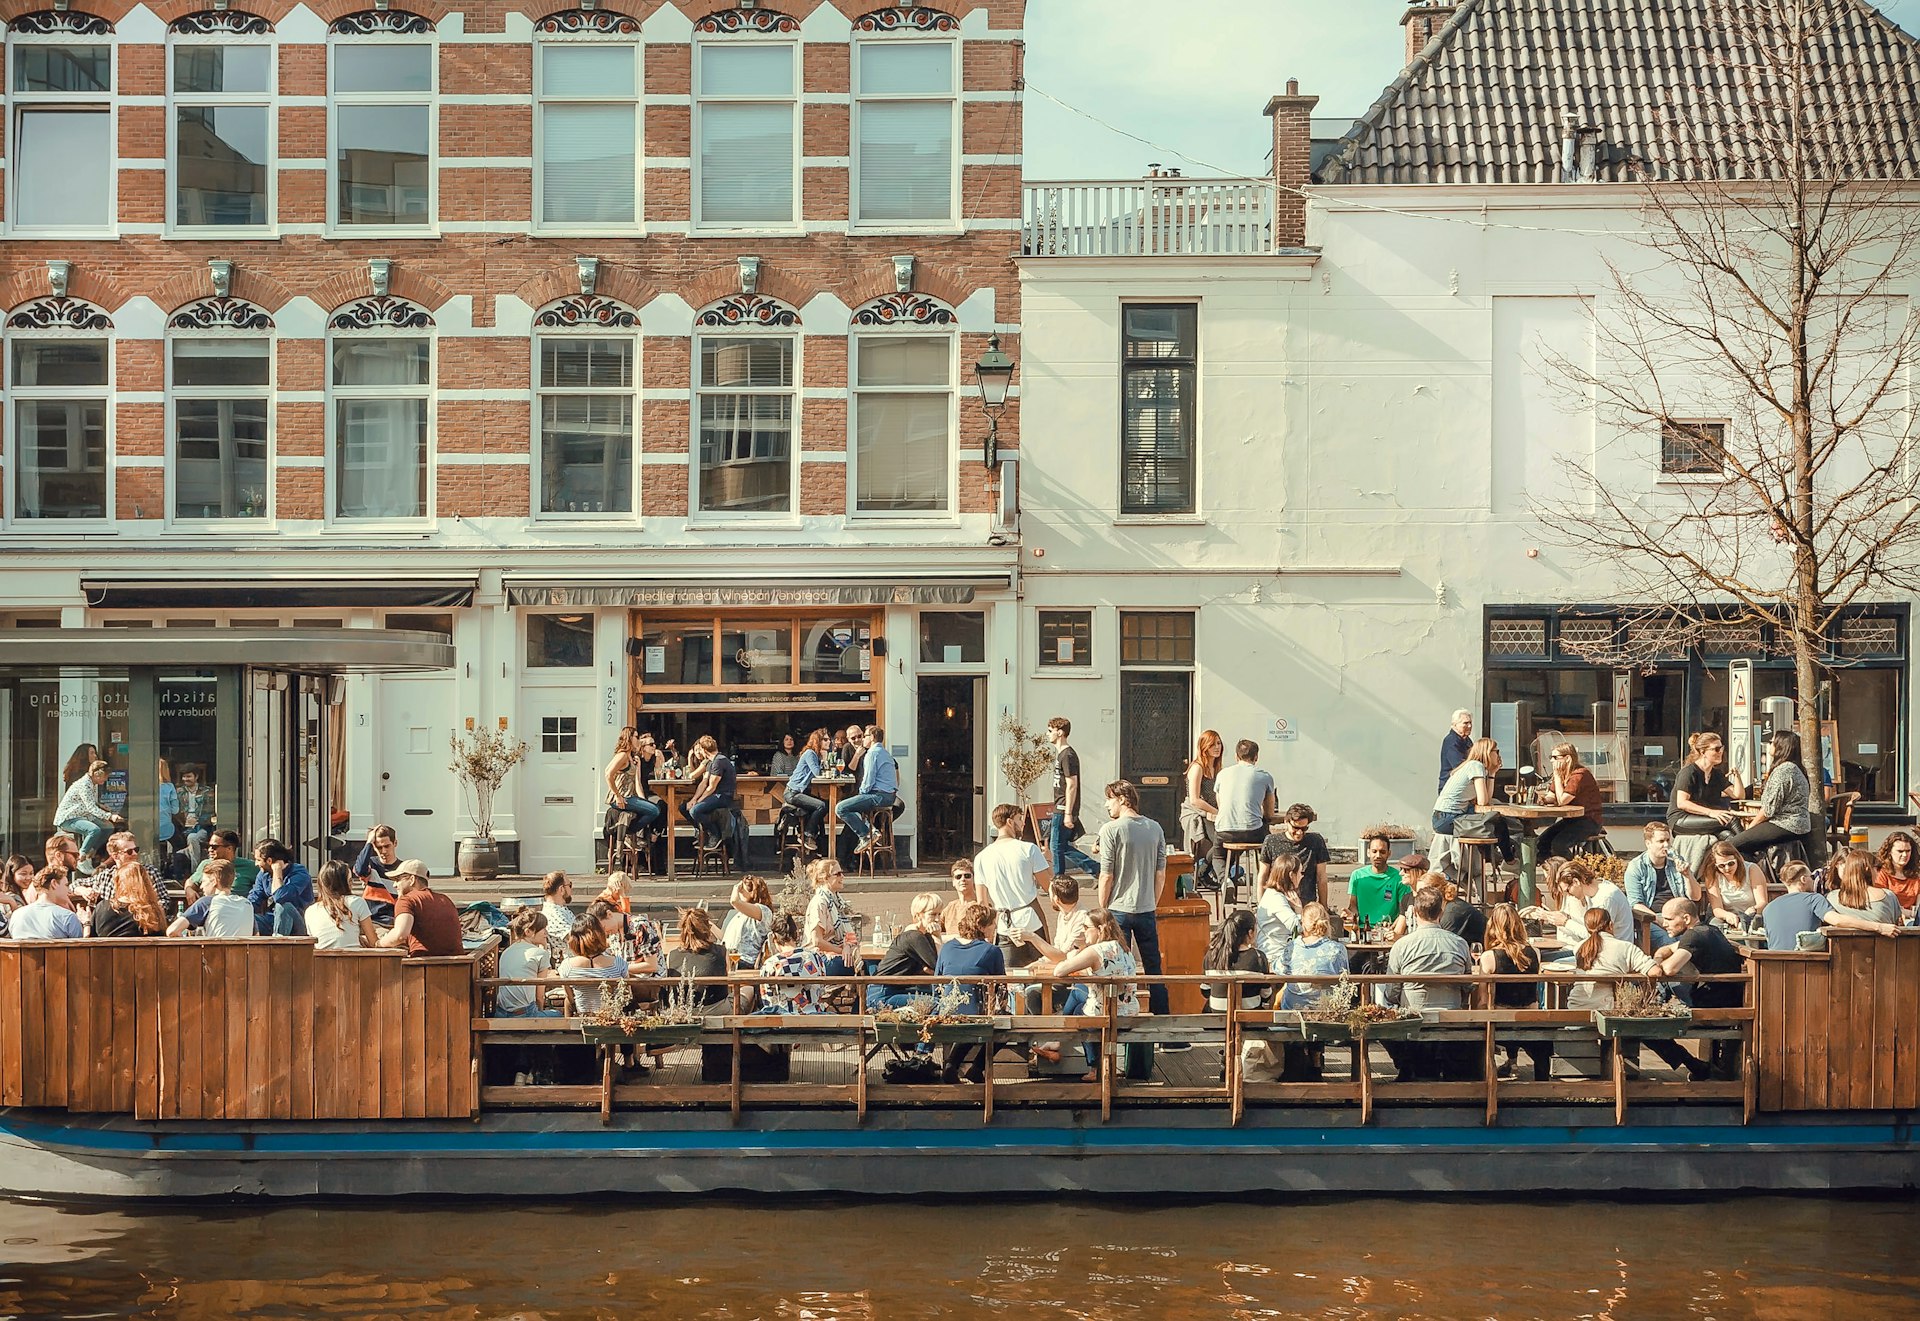 Crowds of people eat and drink outside Grapes and Olives riverboat cafe on the side of the canals in The Hague, the Netherlands